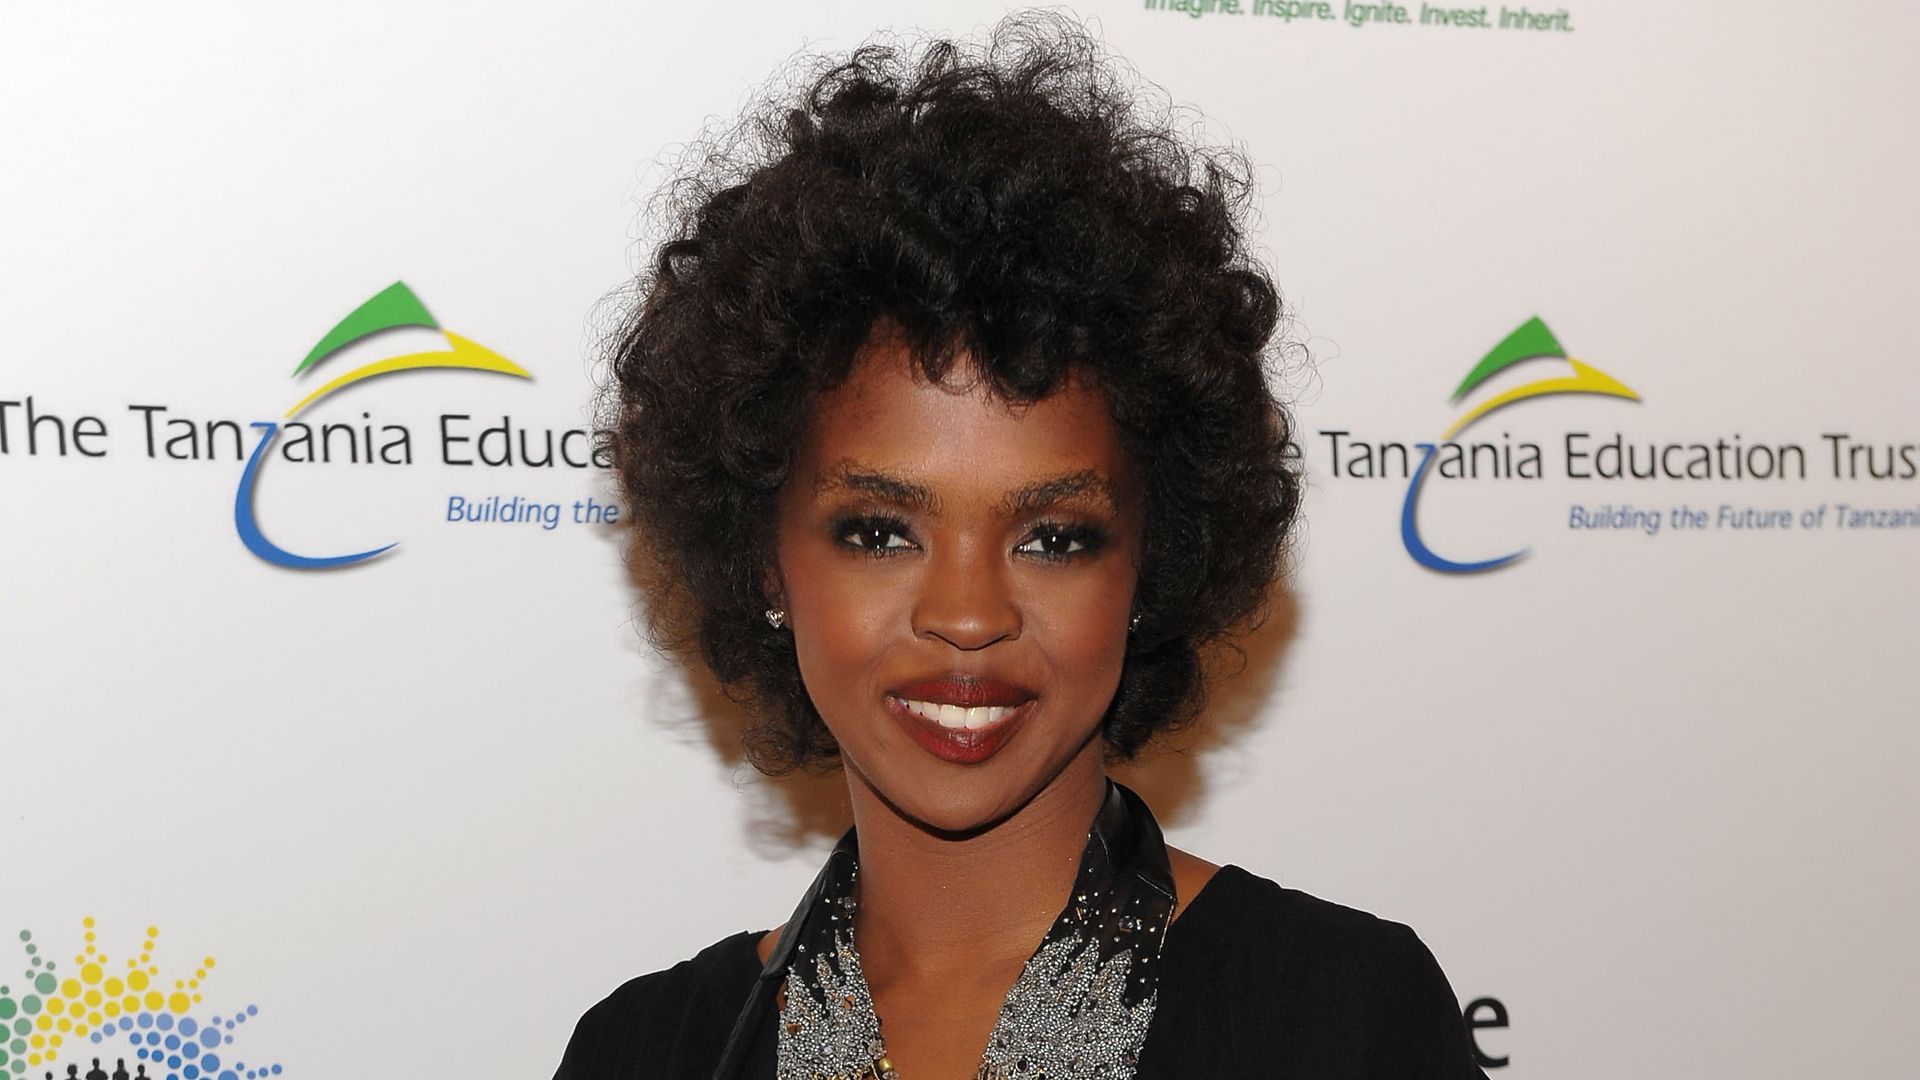 Lauryn Hill attends the Tanzania Education Trust New York Gala hosted by President Jakaya Kikwete of the United Republic of Tanzania at Plaza Athenee on April 19, 2010 in New York City